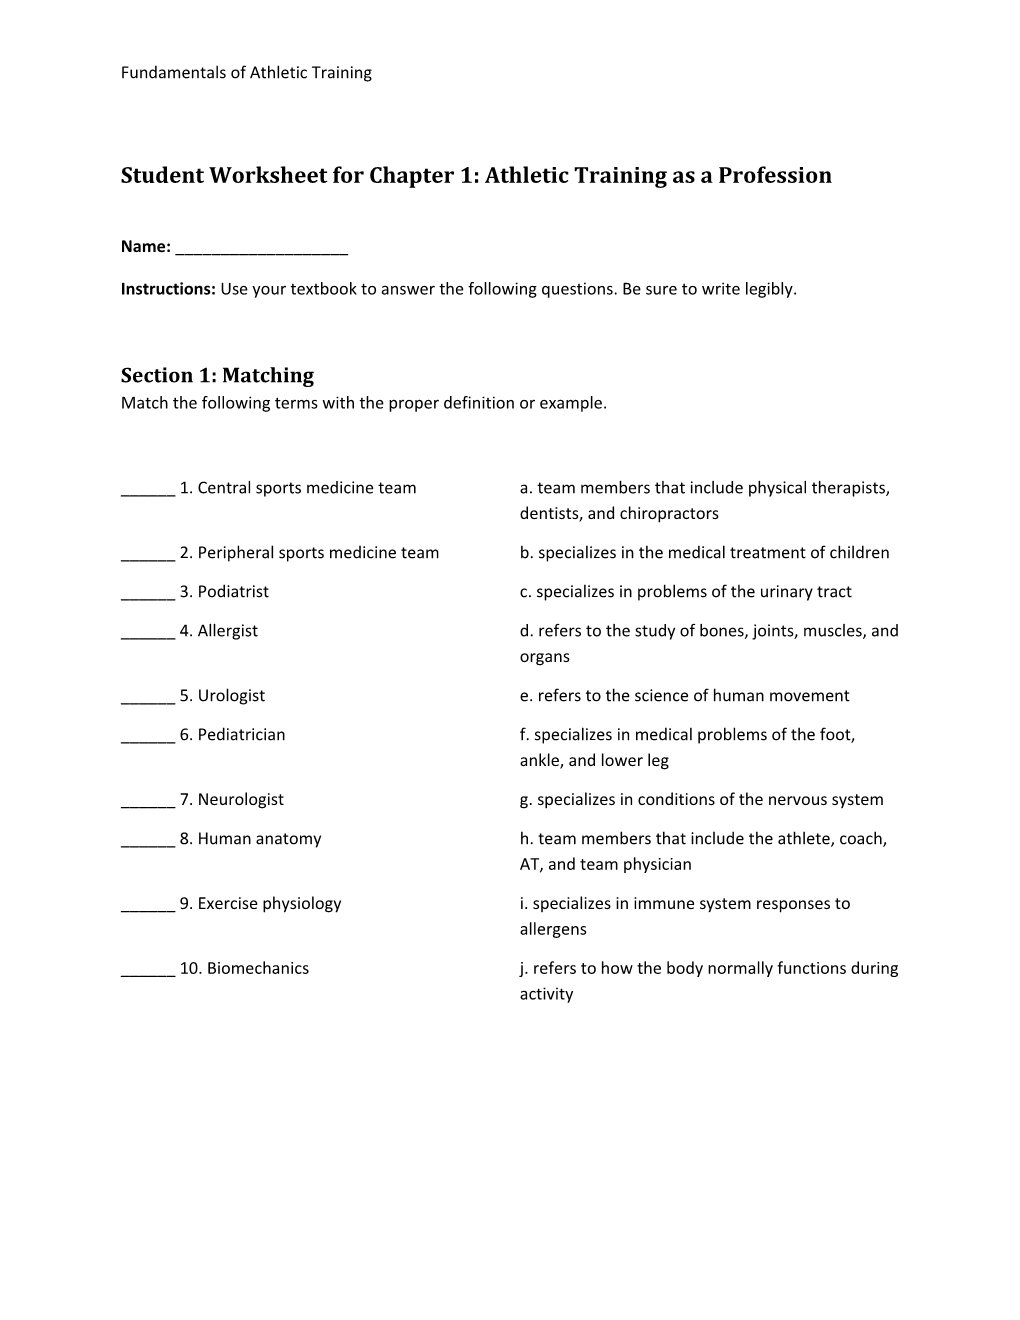 Student Worksheet for Chapter 1: Athletic Training As a Profession